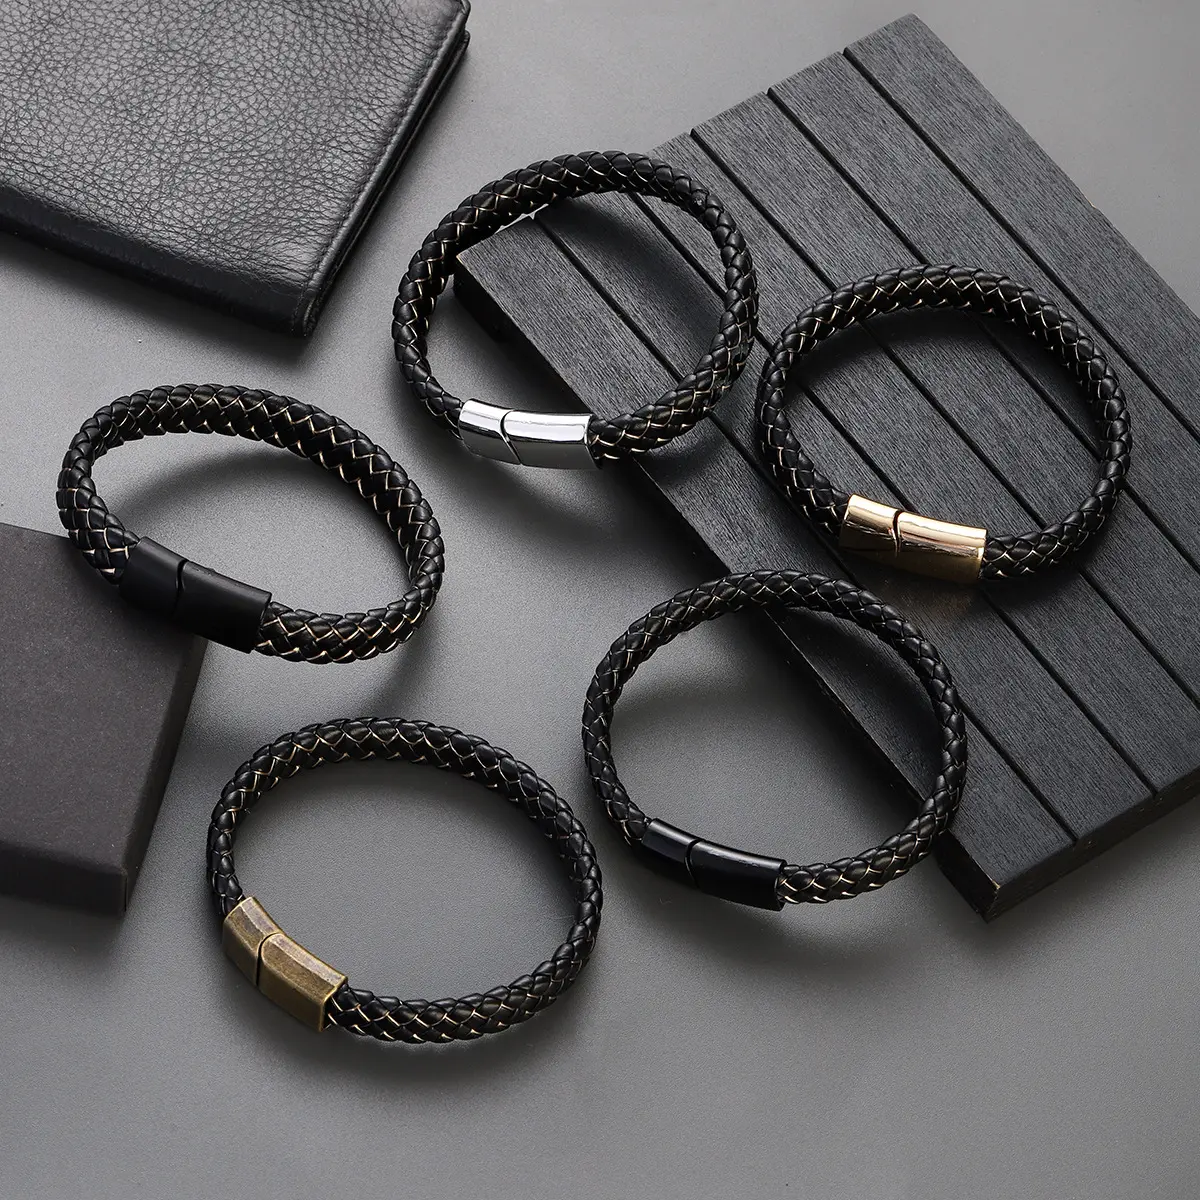 Wholesale Men's Fashion Jewelry Handcrafted Cowhide Bracelets & Woven Star Bangles New Collection